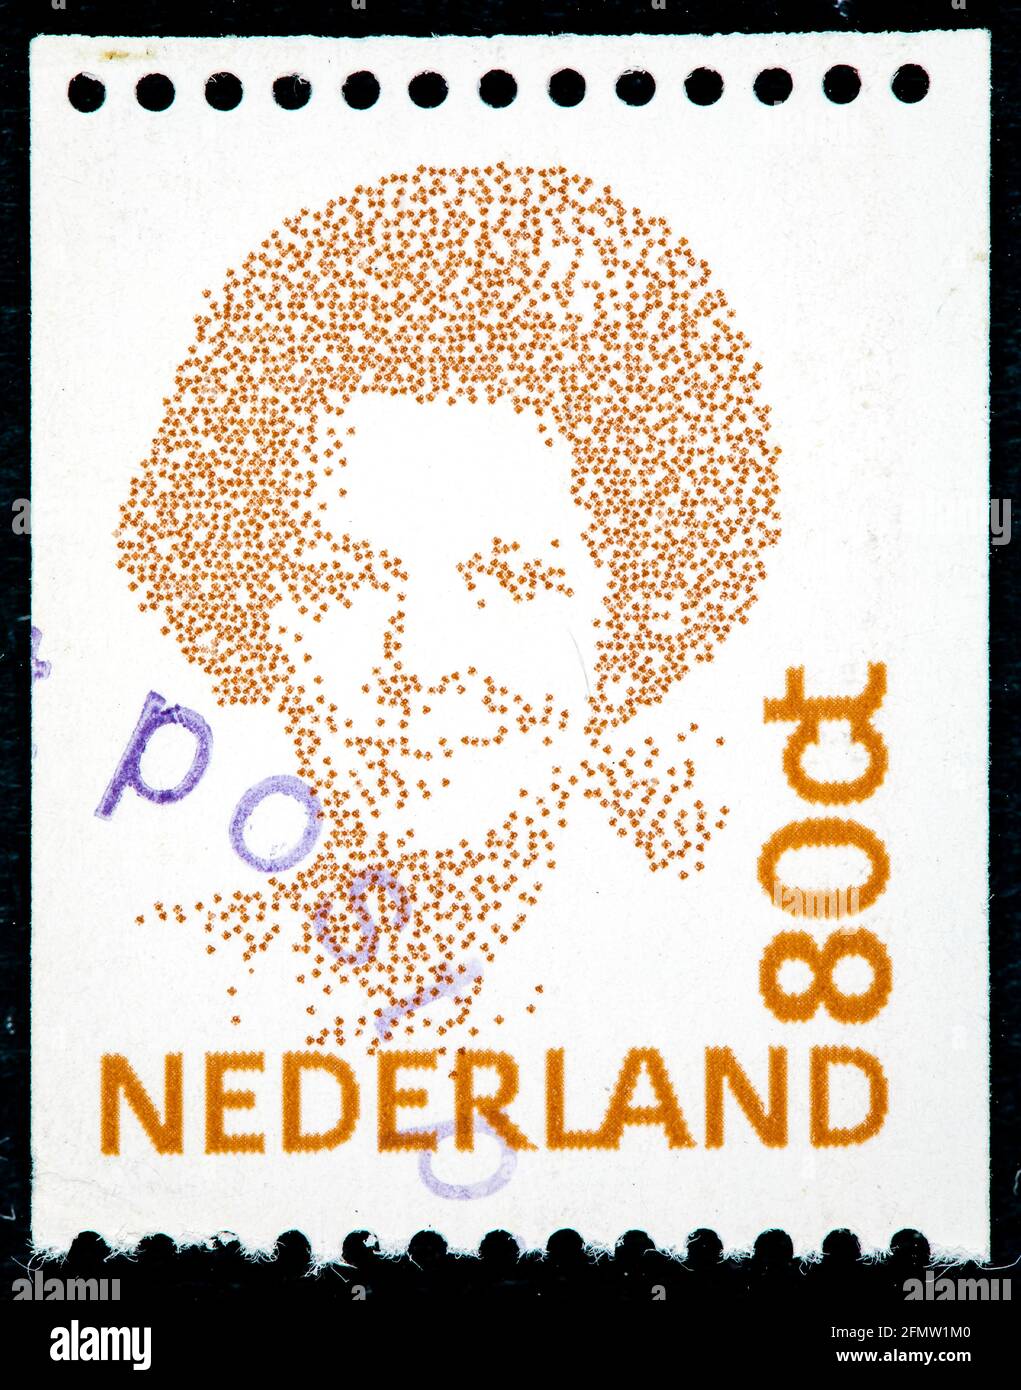 NETHERLANDS - CIRCA 1982: A stamp printed in the Netherlands shows Queen Beatrix, circa 1982. Stock Photo